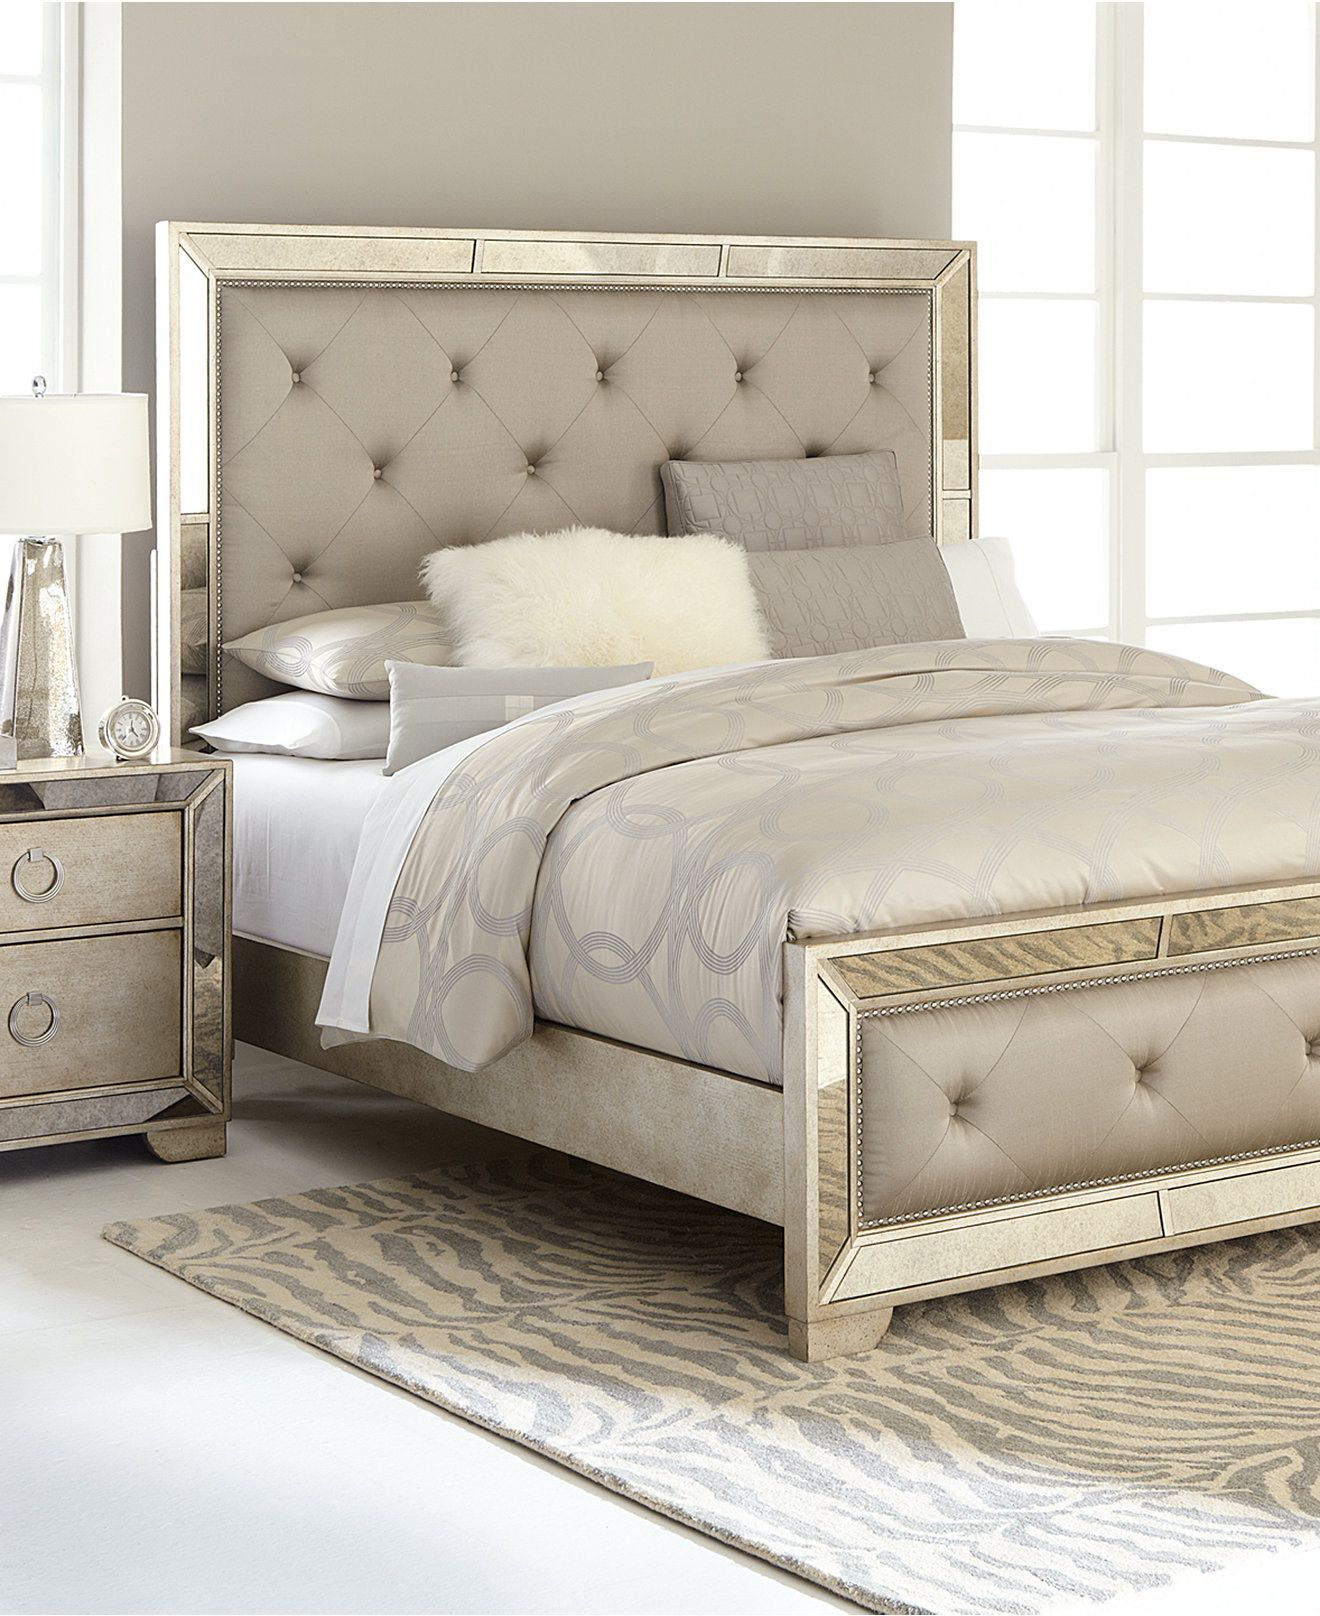 Ailey Bedroom Furniture Collection In 2019 My Dream Home within dimensions 1320 X 1616